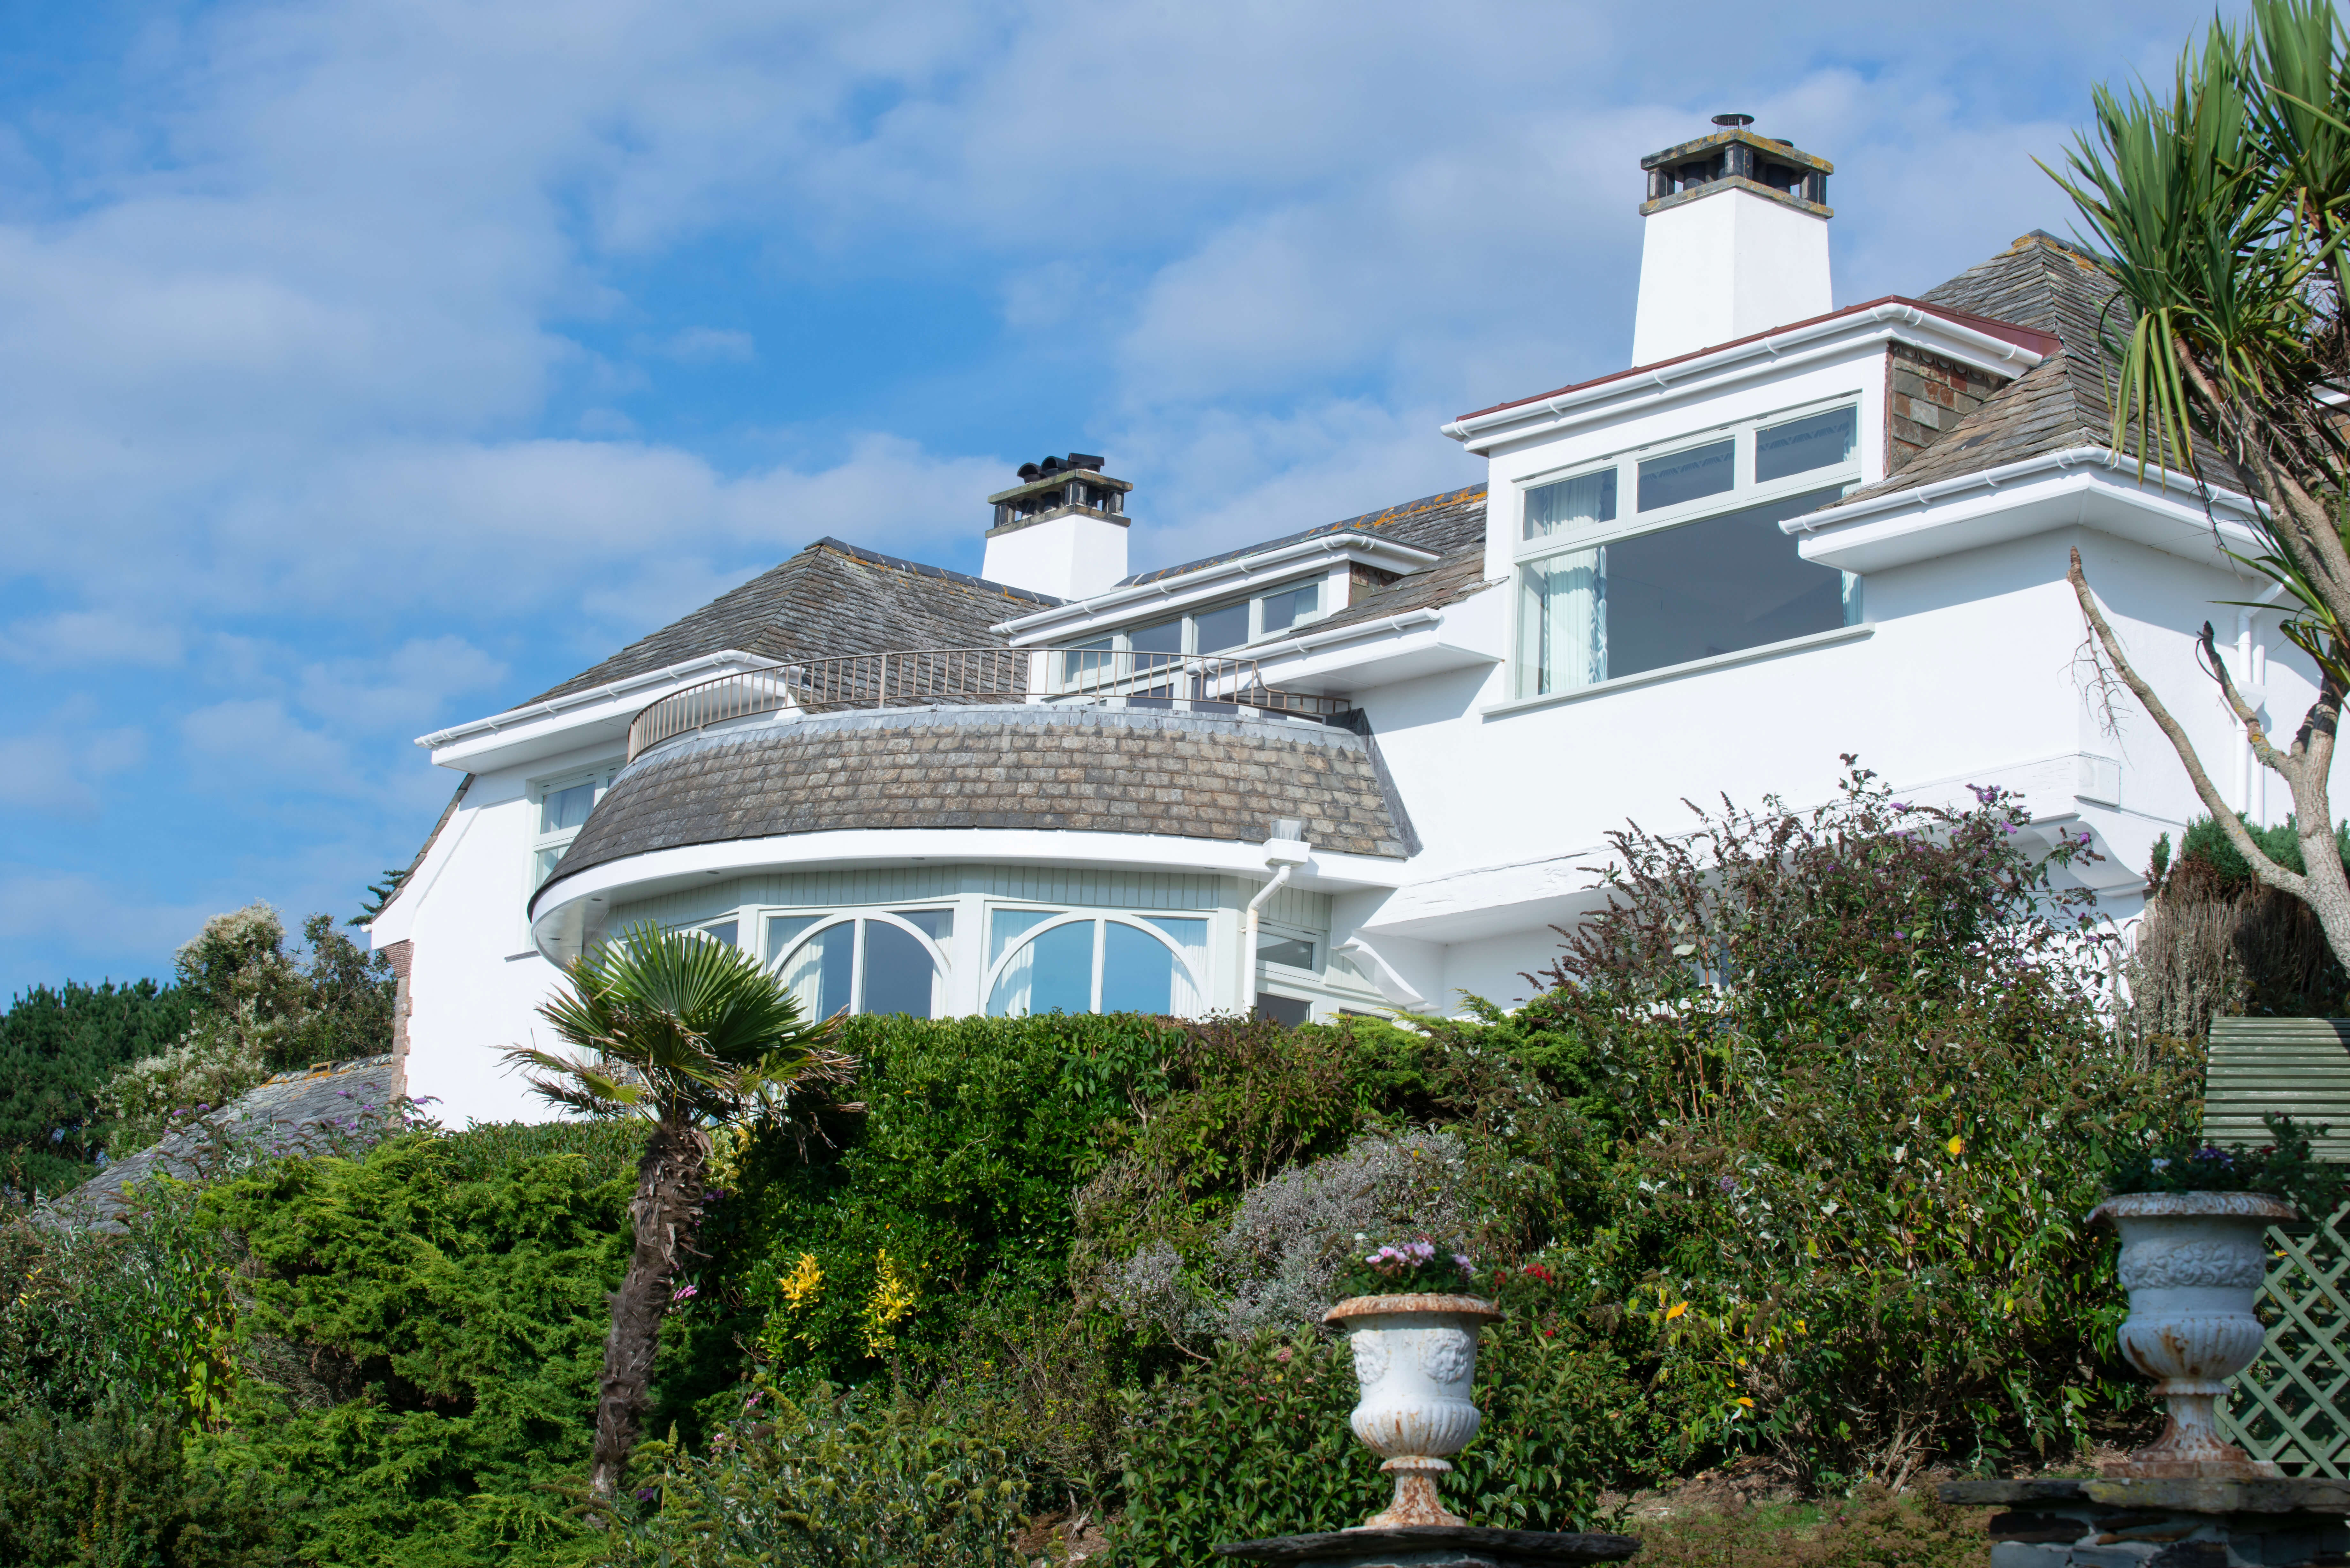 Longfield - fantastic location overlooking Bantham and the sea